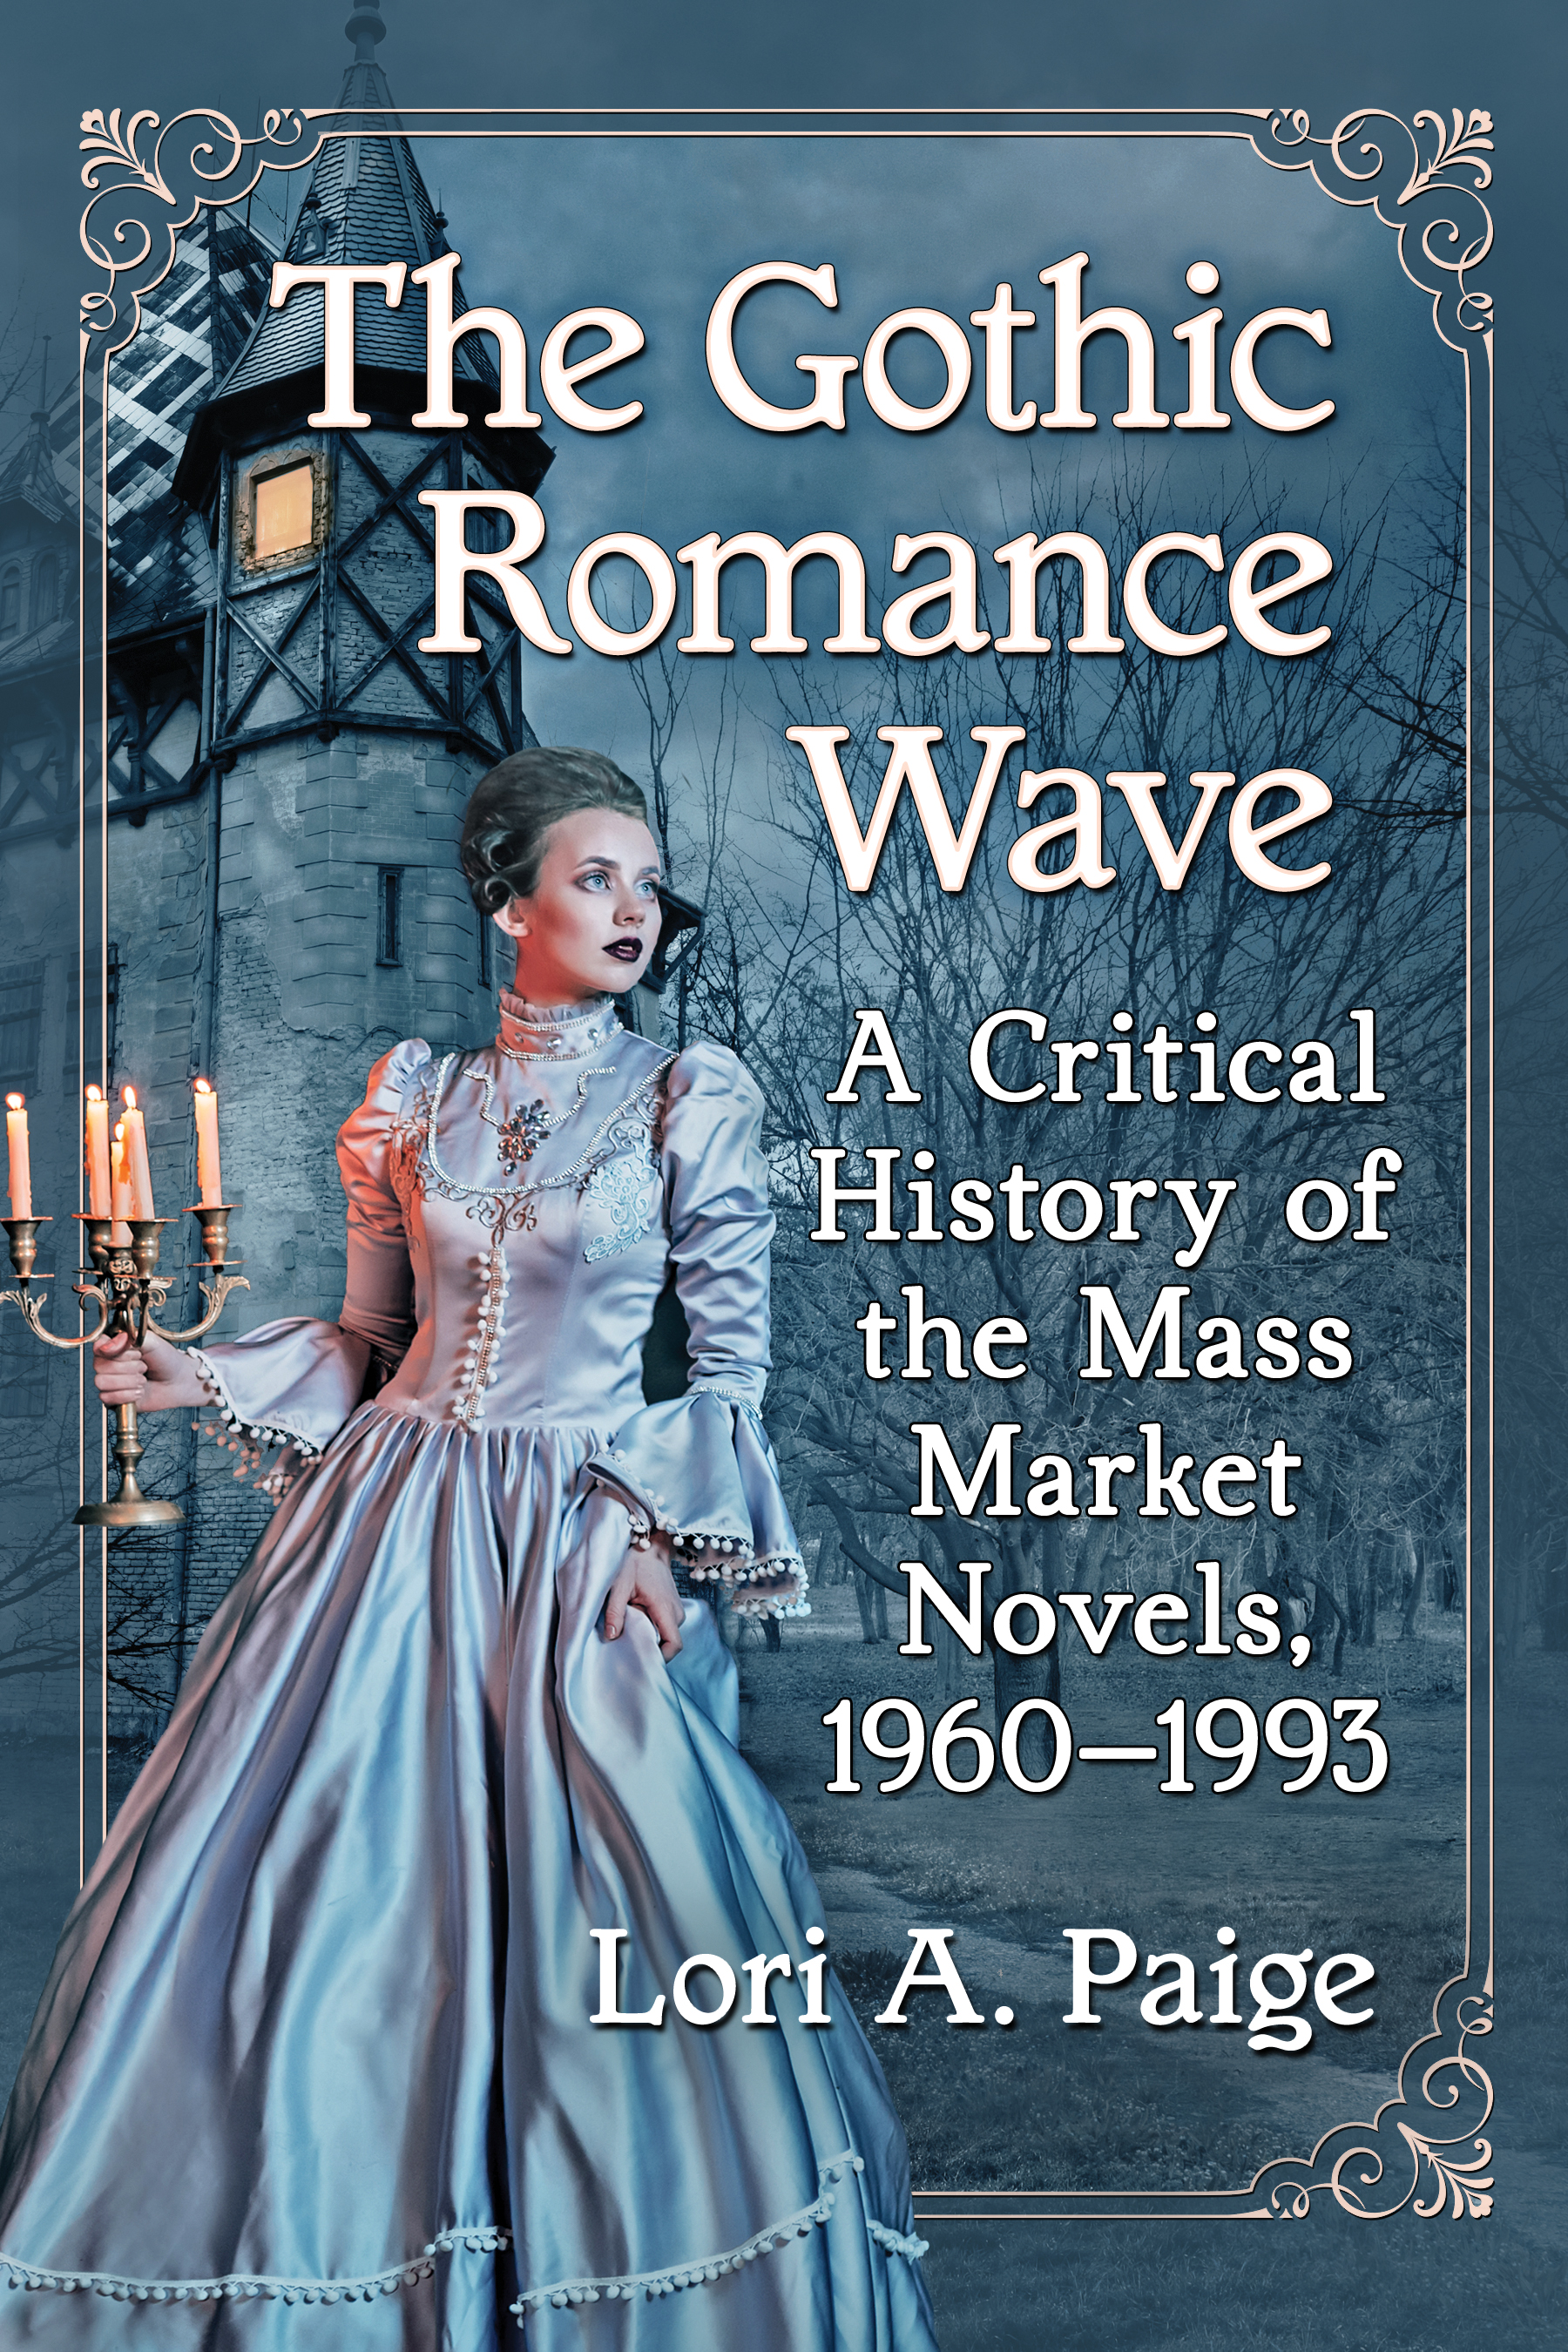 The Gothic Romance Wave A Critical History of the Mass Market Novels 1960-1993 - image 1